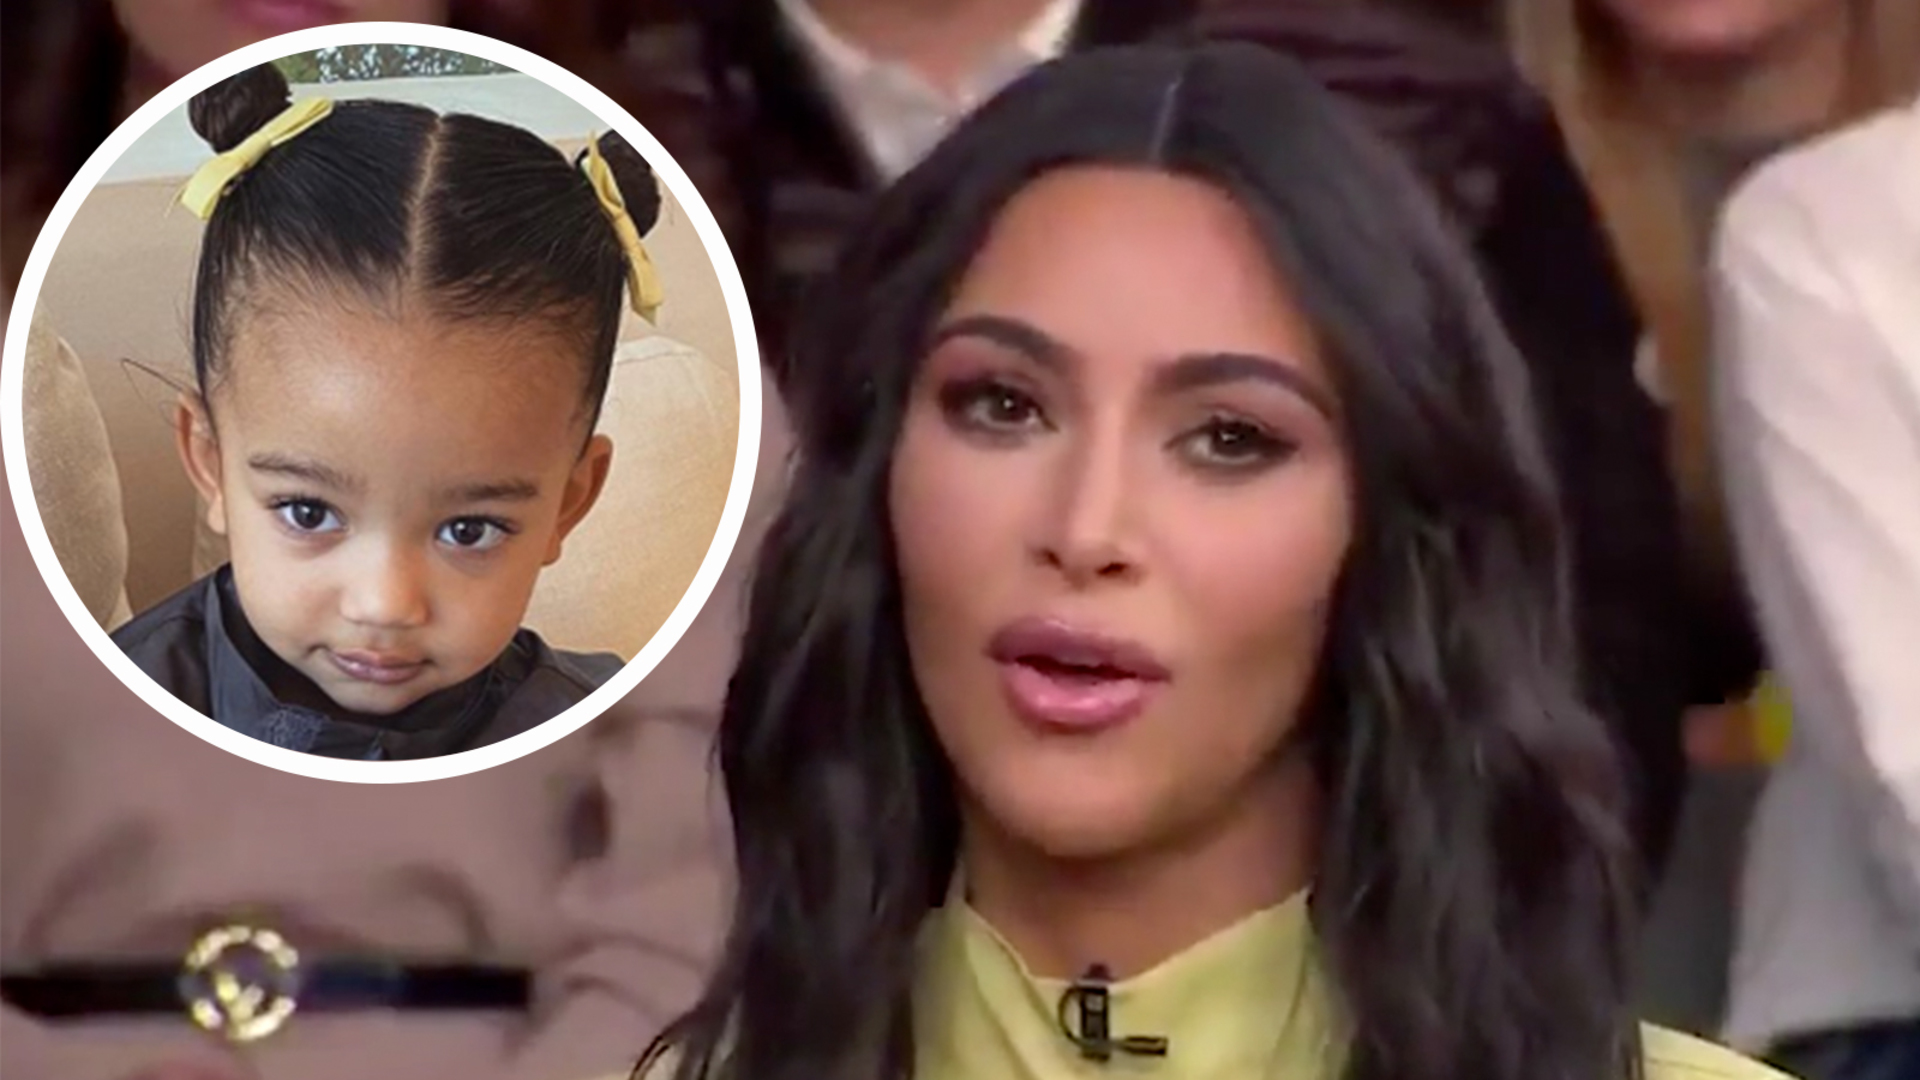 Kim Kardashian’s Daughter Chicago Fell and Needed Stitches on Head